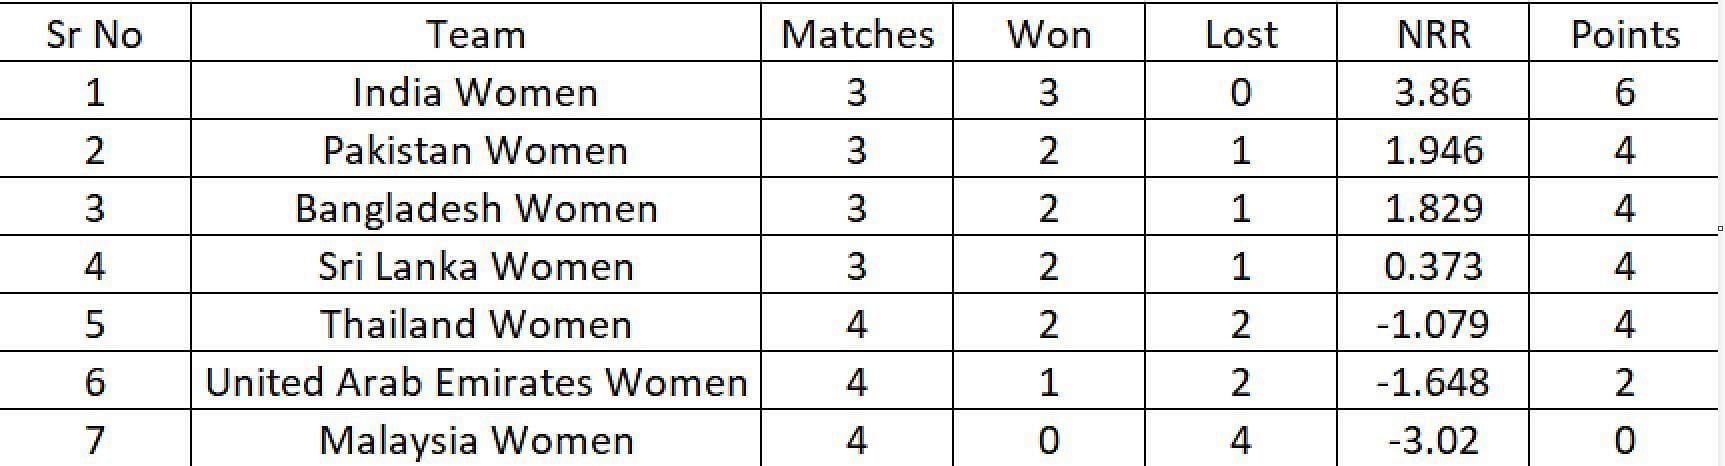 Updated Points Table after Thailand Women vs United Arab Emirates Women